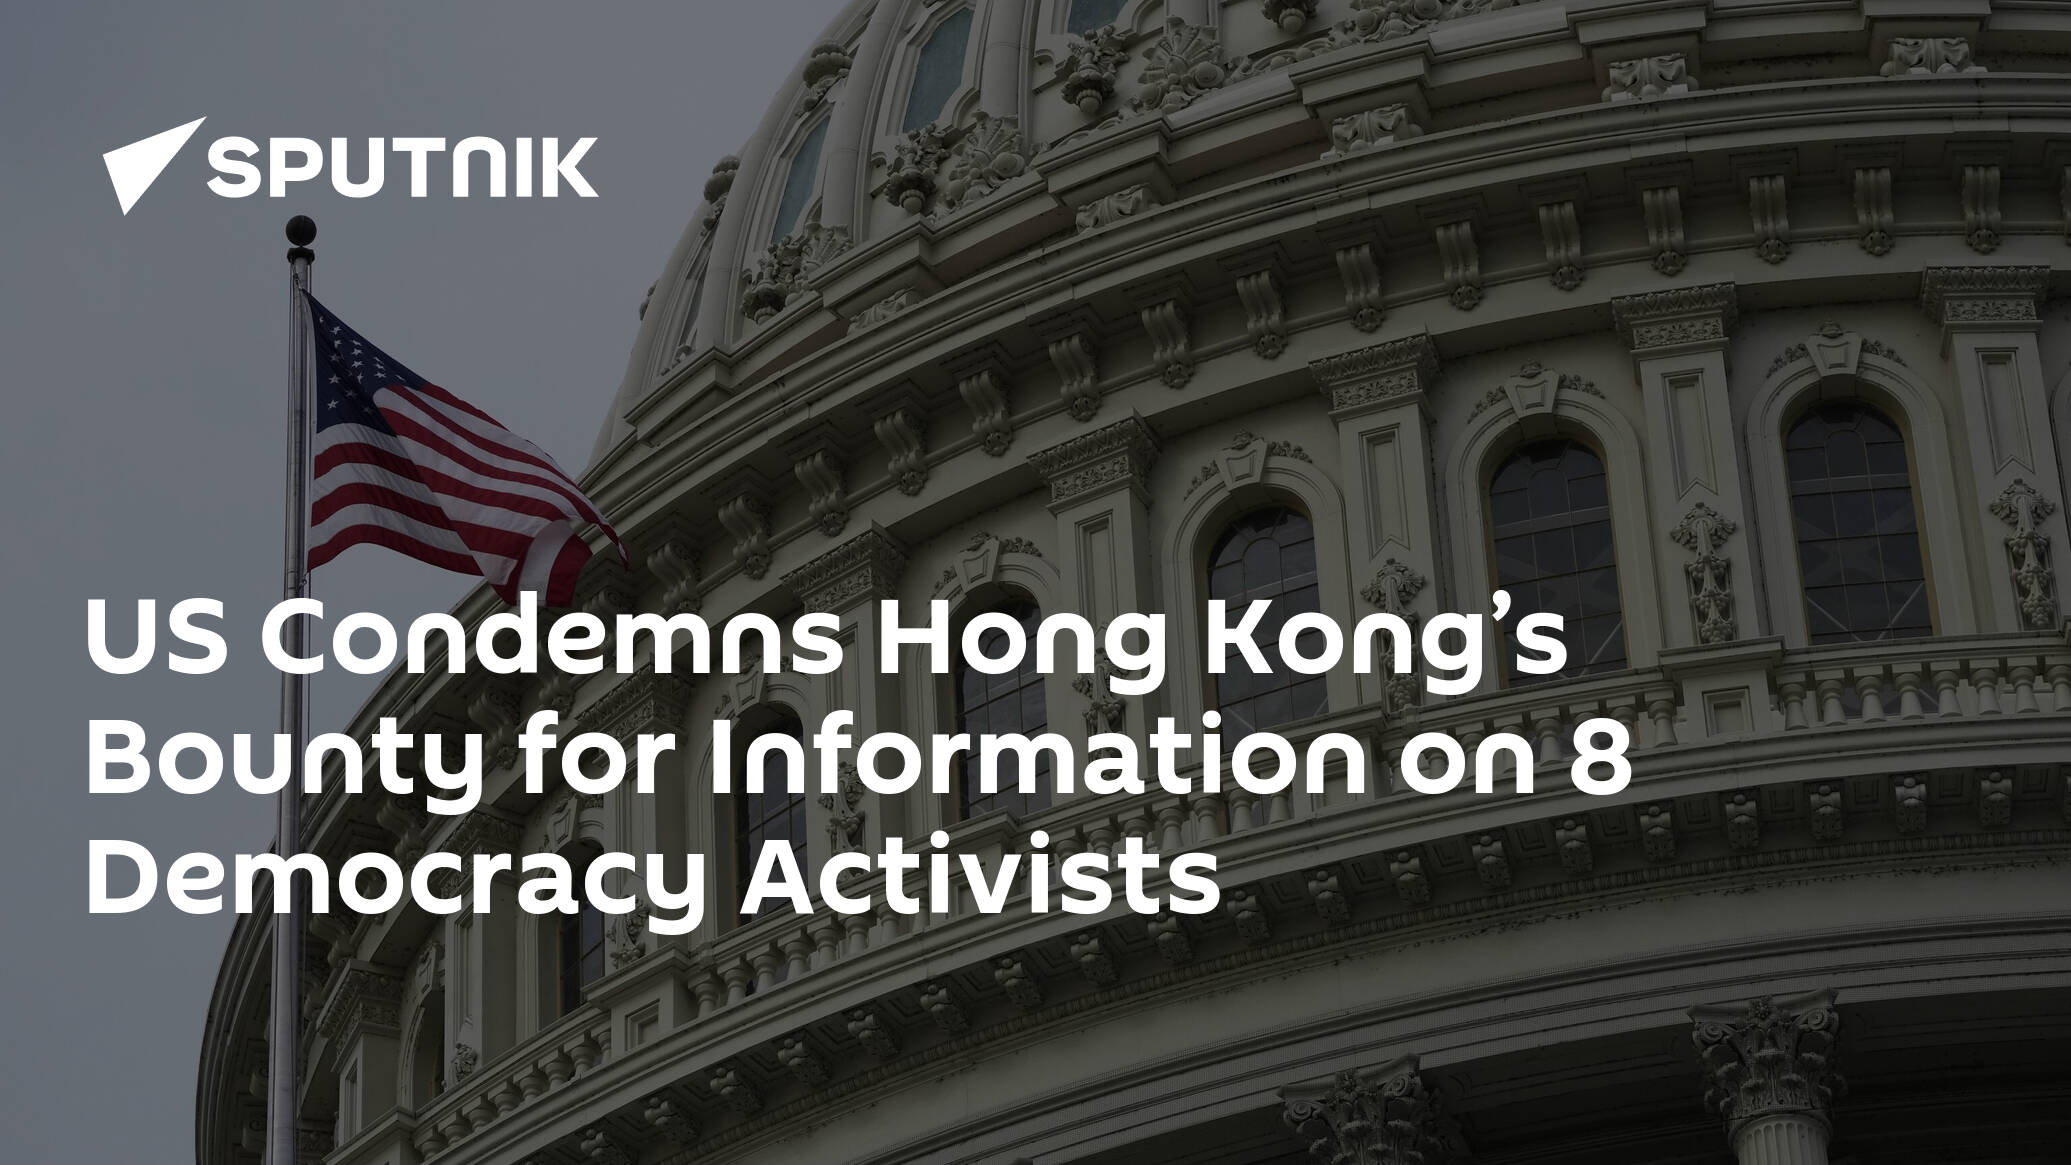 US Condemns Hong Kong’s Bounty for Information on 8 Democracy Activists